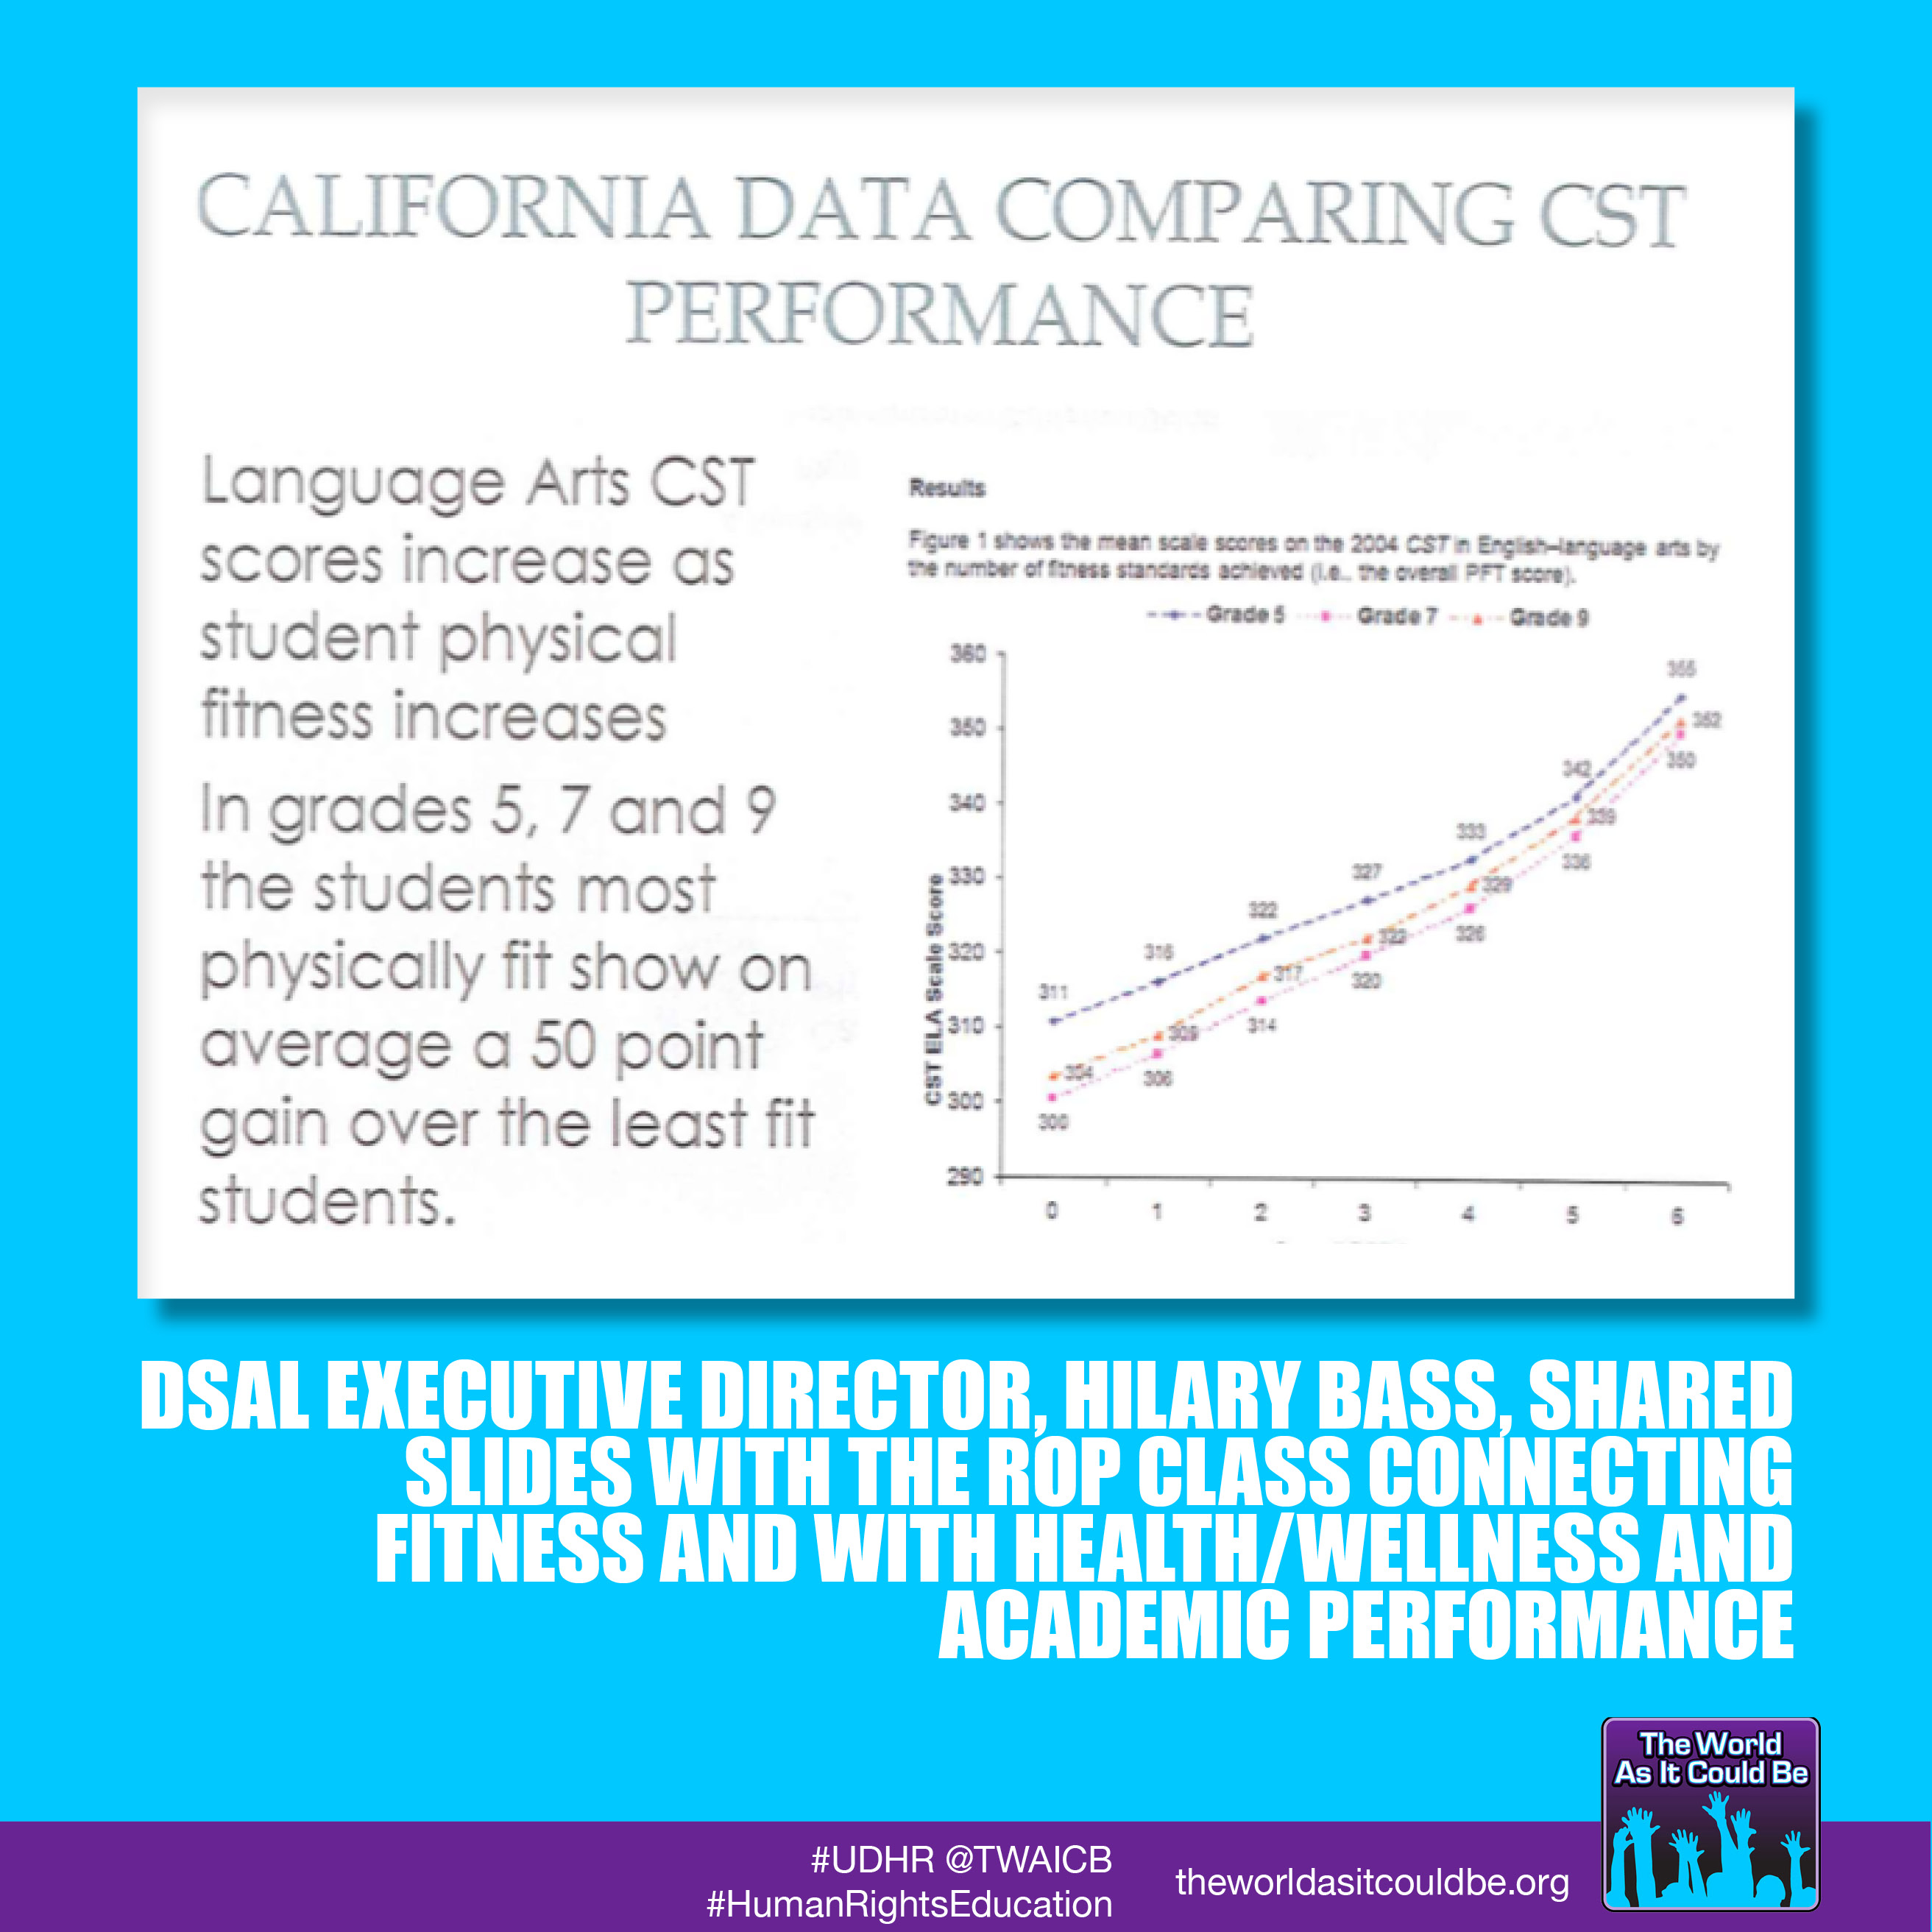 CA Data comparing CST Performance and how access to recreation increases scores